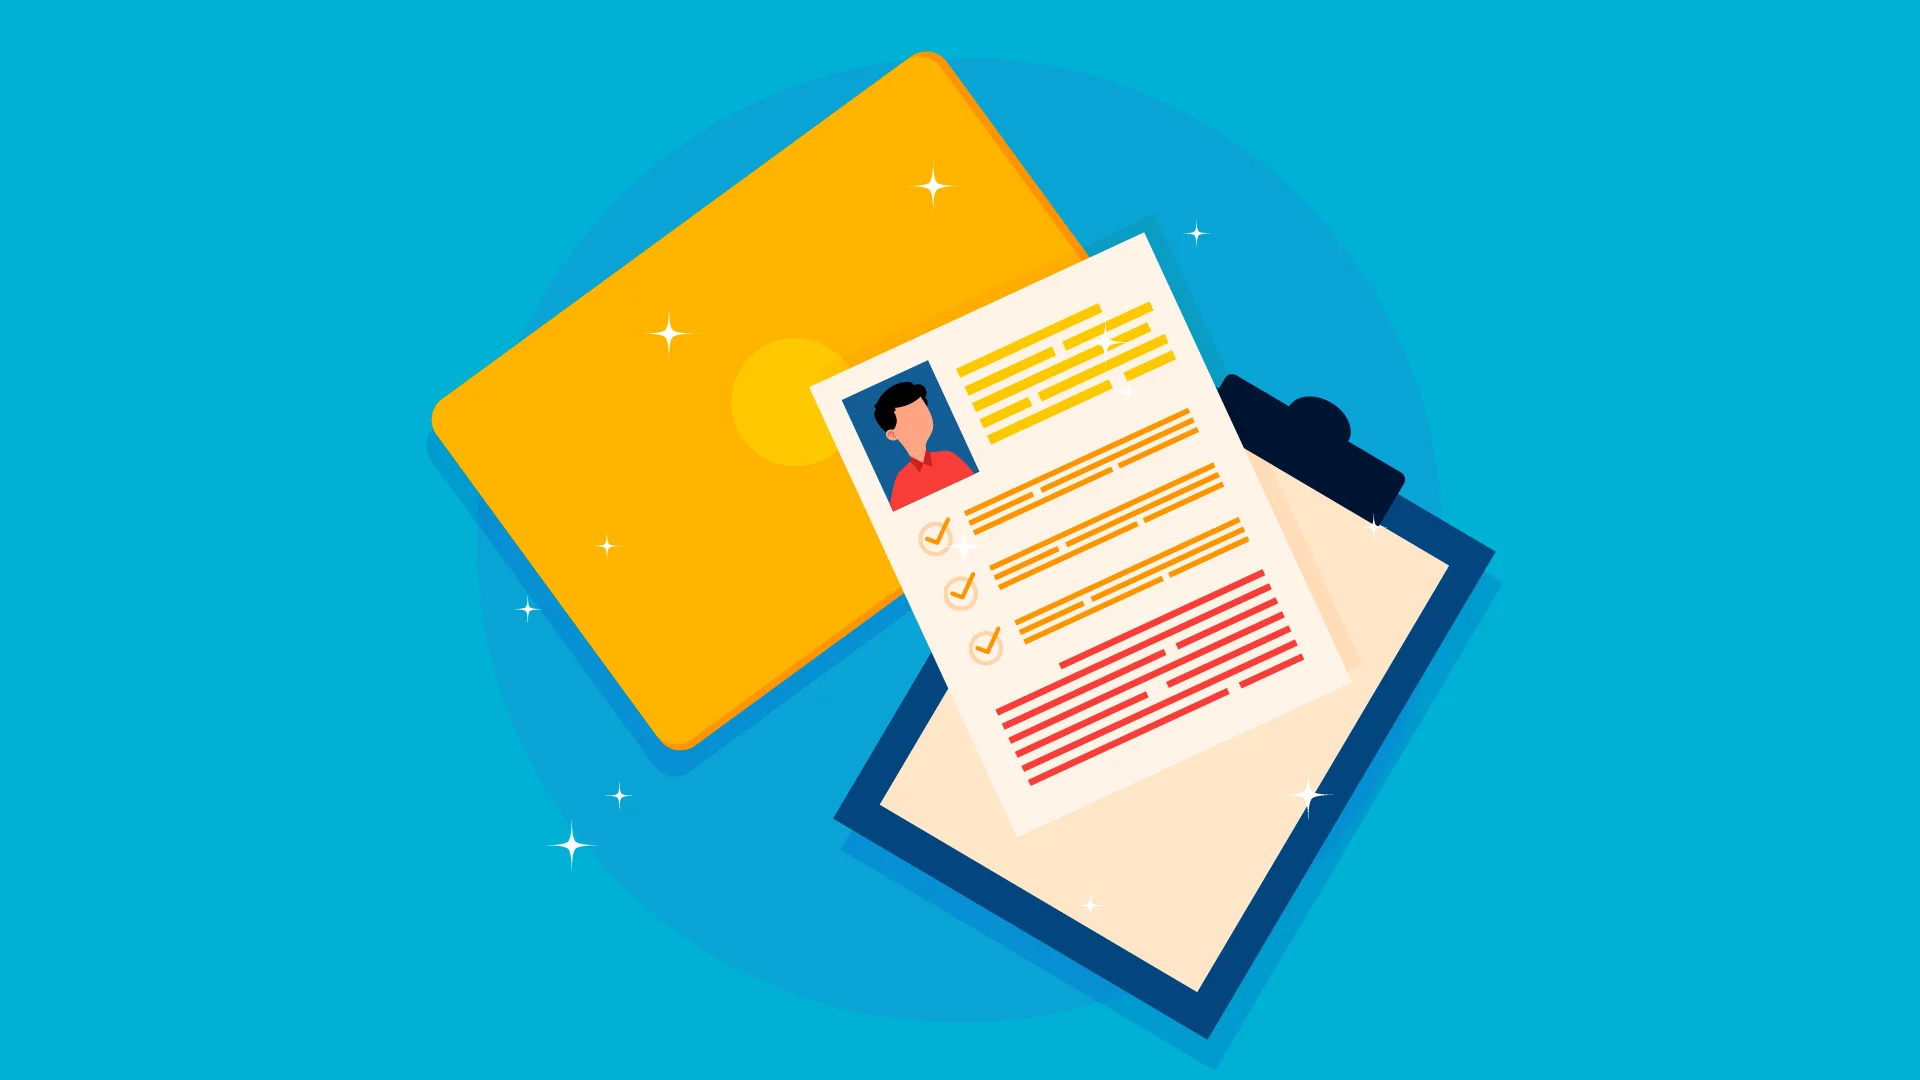 HOW TO CREATE A DEVELOPER CV THAT ATTRACTS RECRUITERS